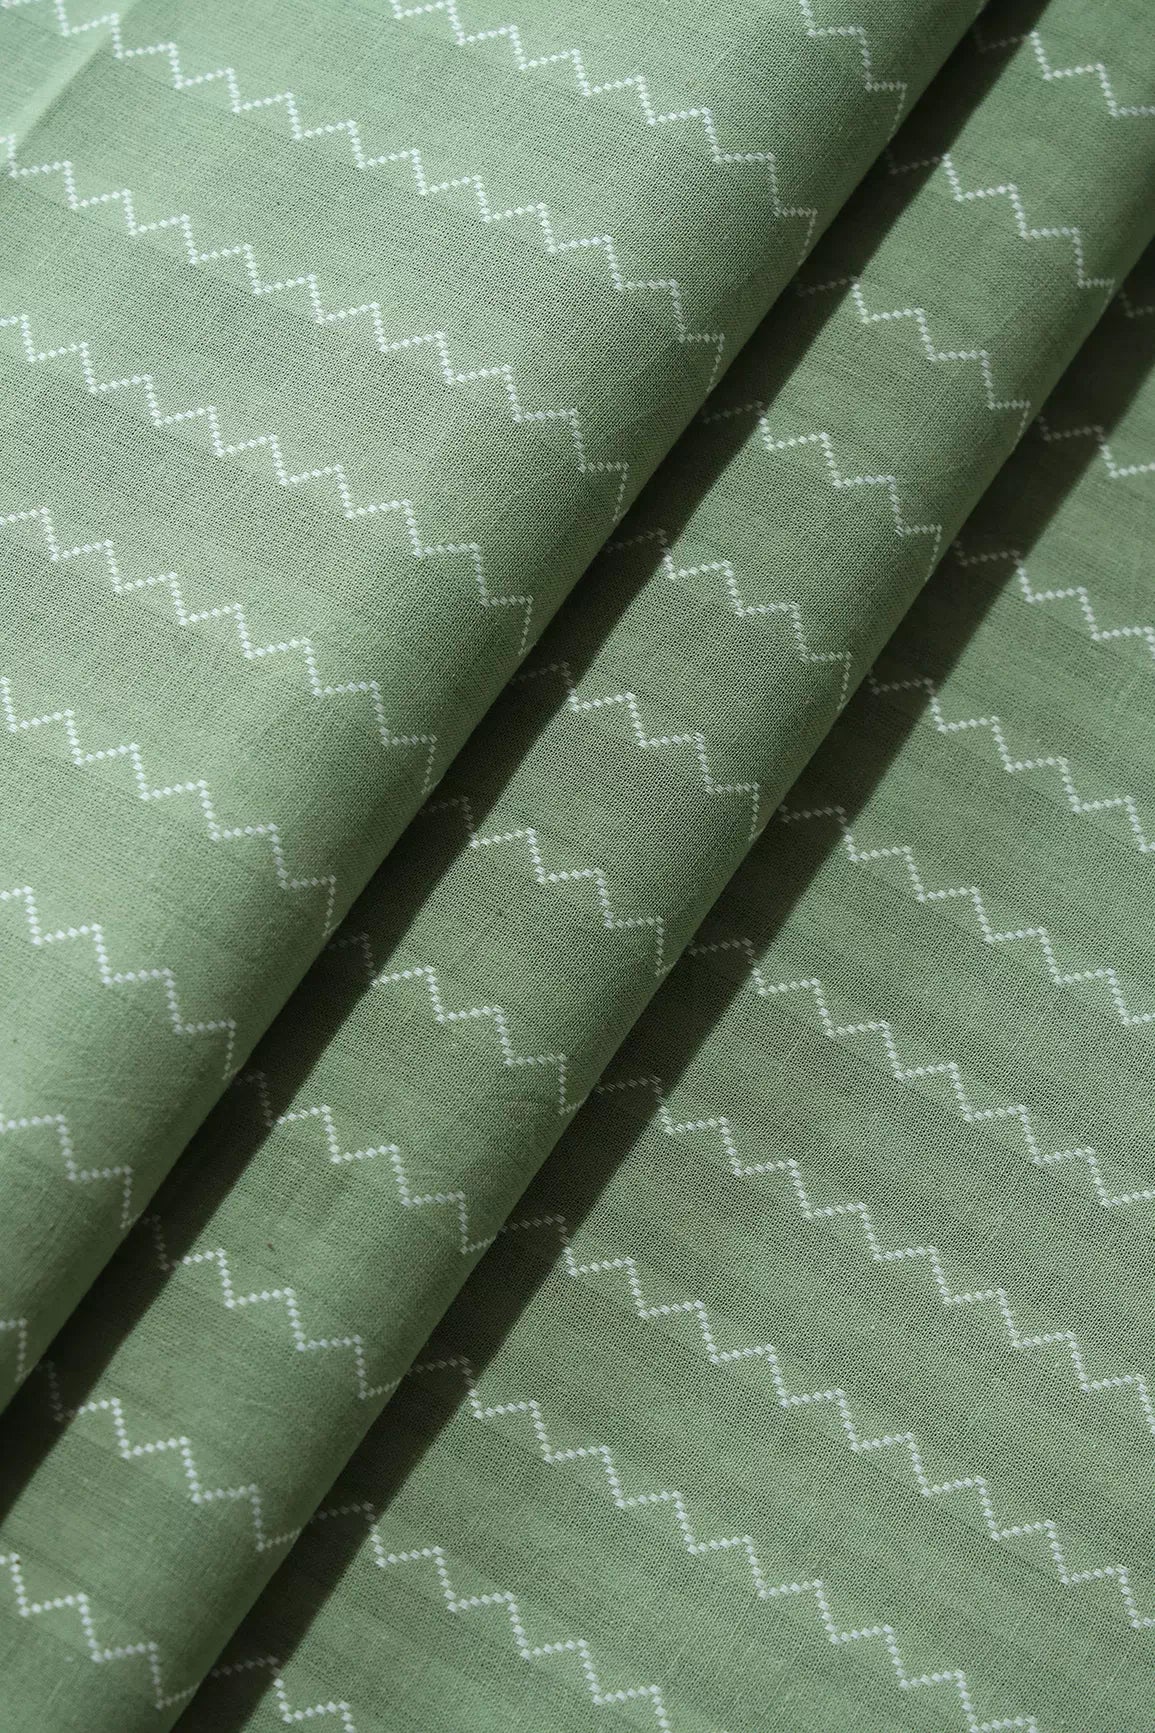 Olive And White Chevron Pattern On Handwoven Organic Cotton Fabric